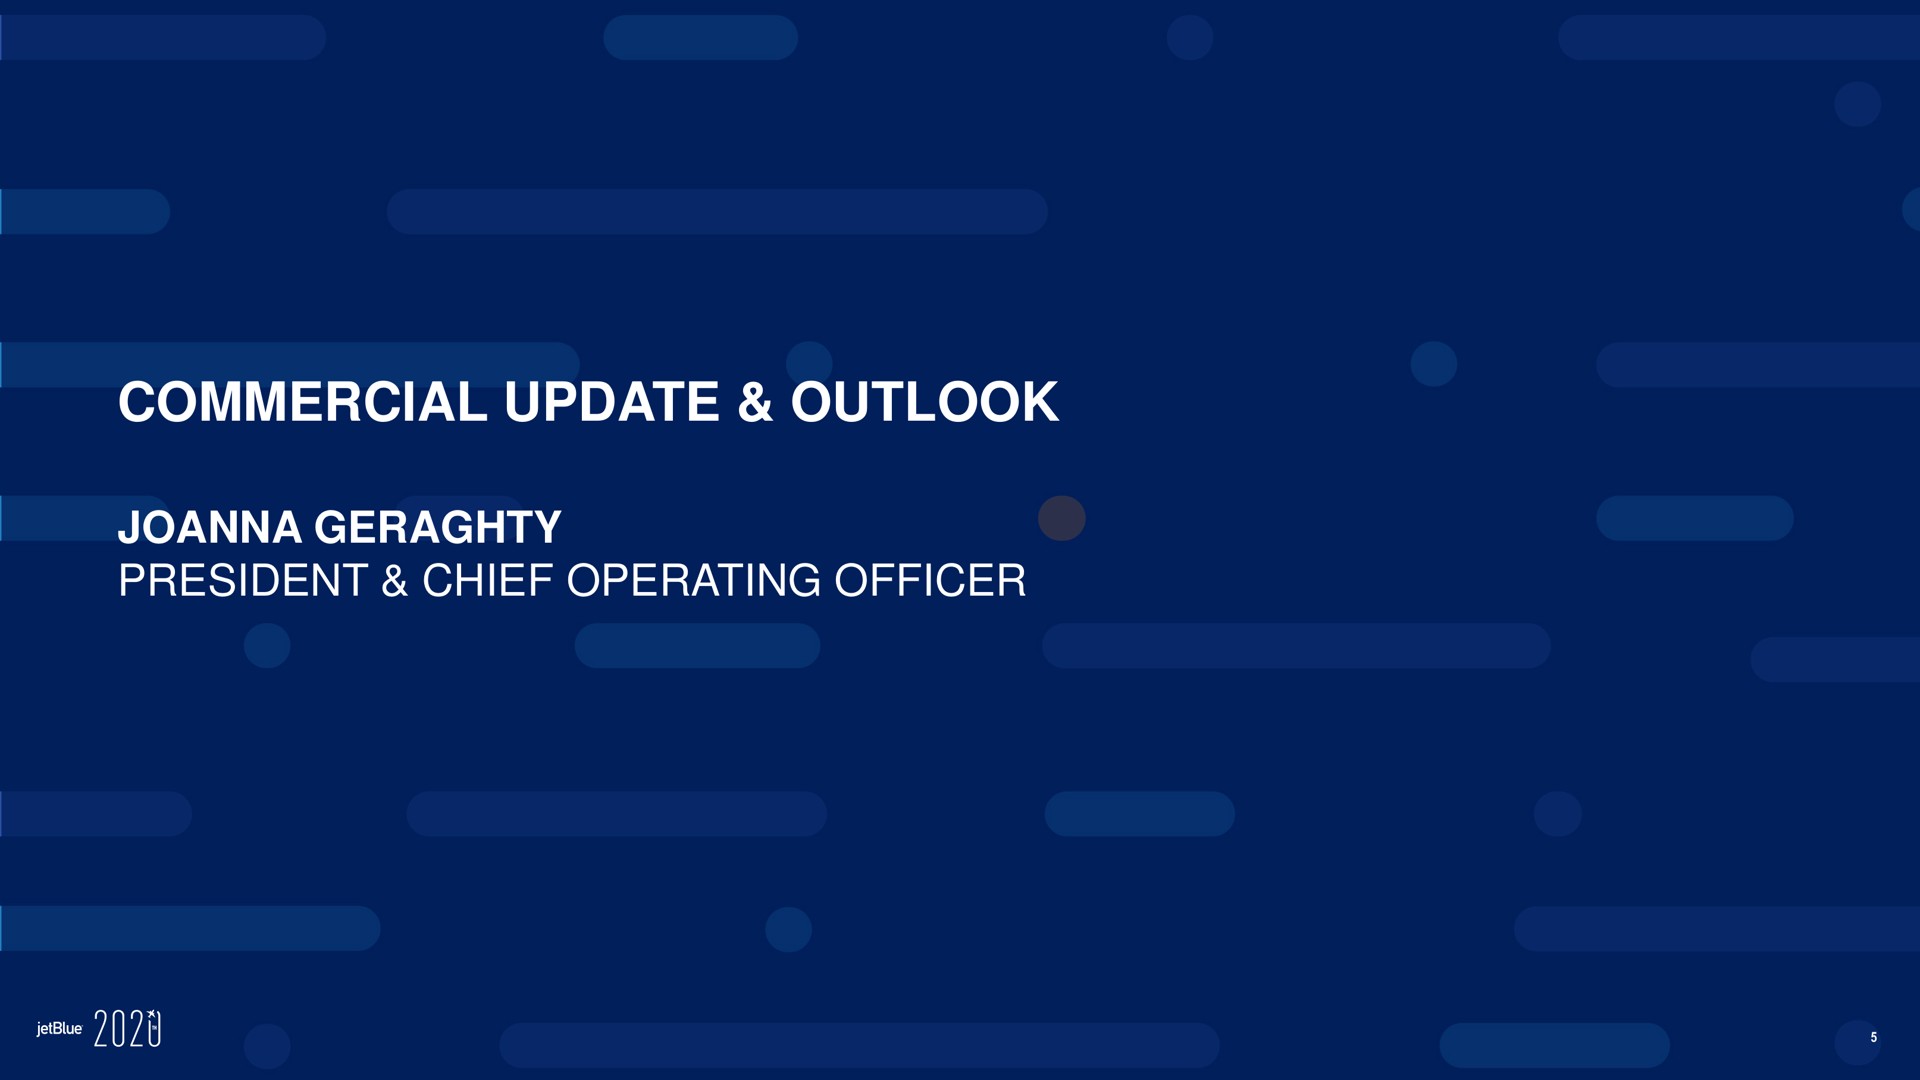 commercial update outlook president chief operating officer sew | jetBlue